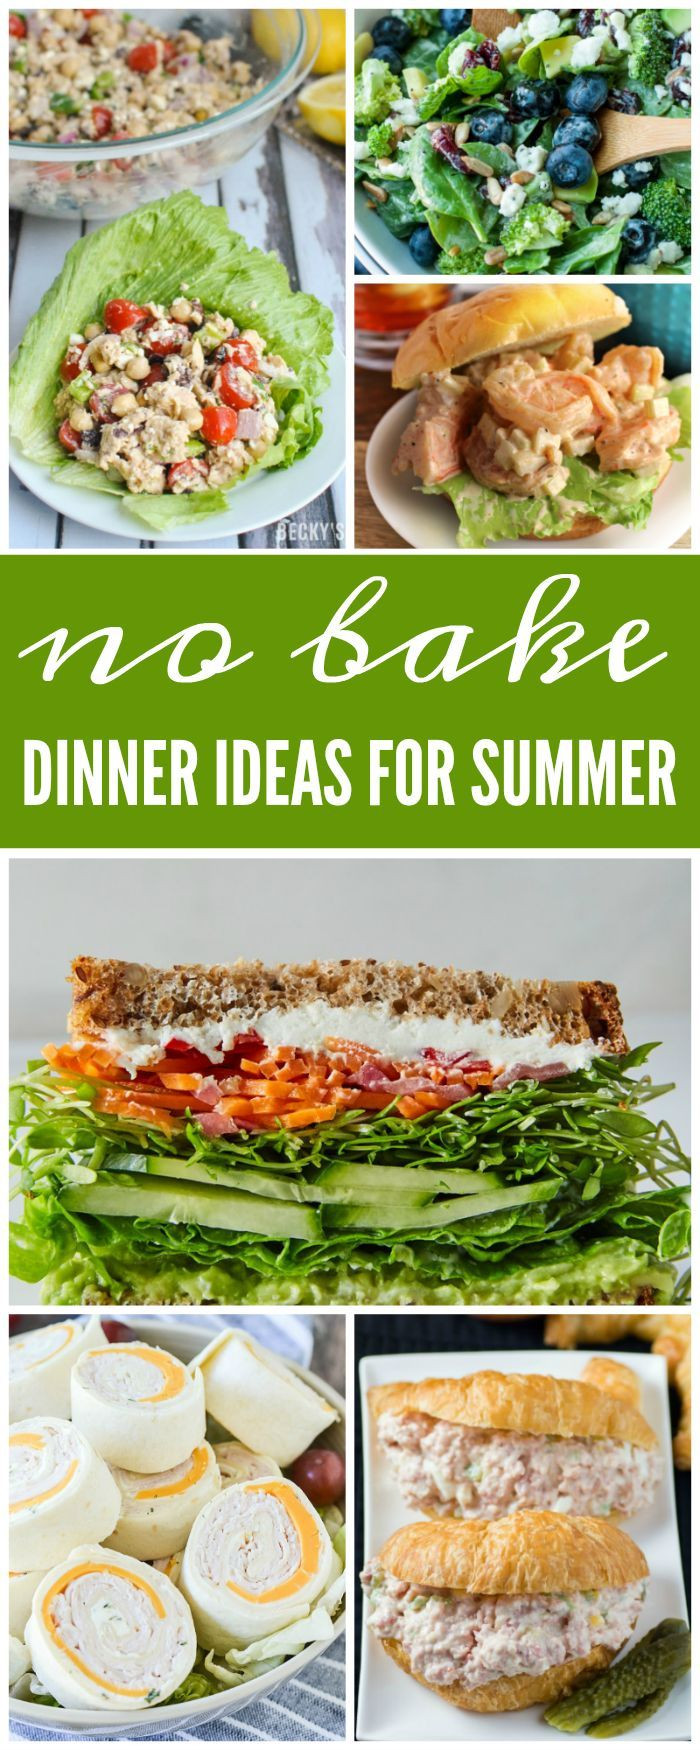 Cool Summer Dinners
 I have gathered to her some No Bake Dinner Ideas for